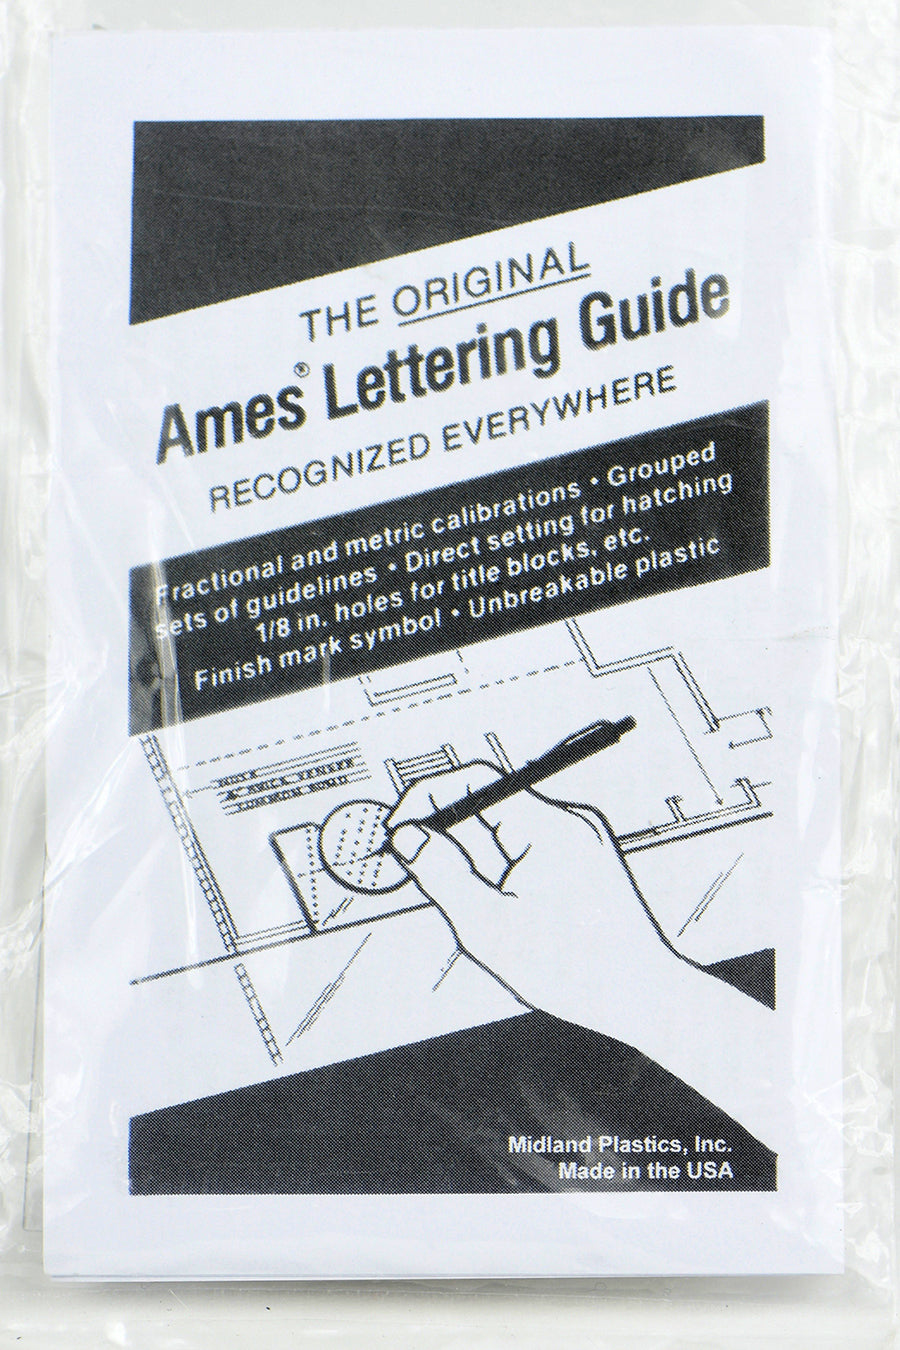 Ames Lettering Guide